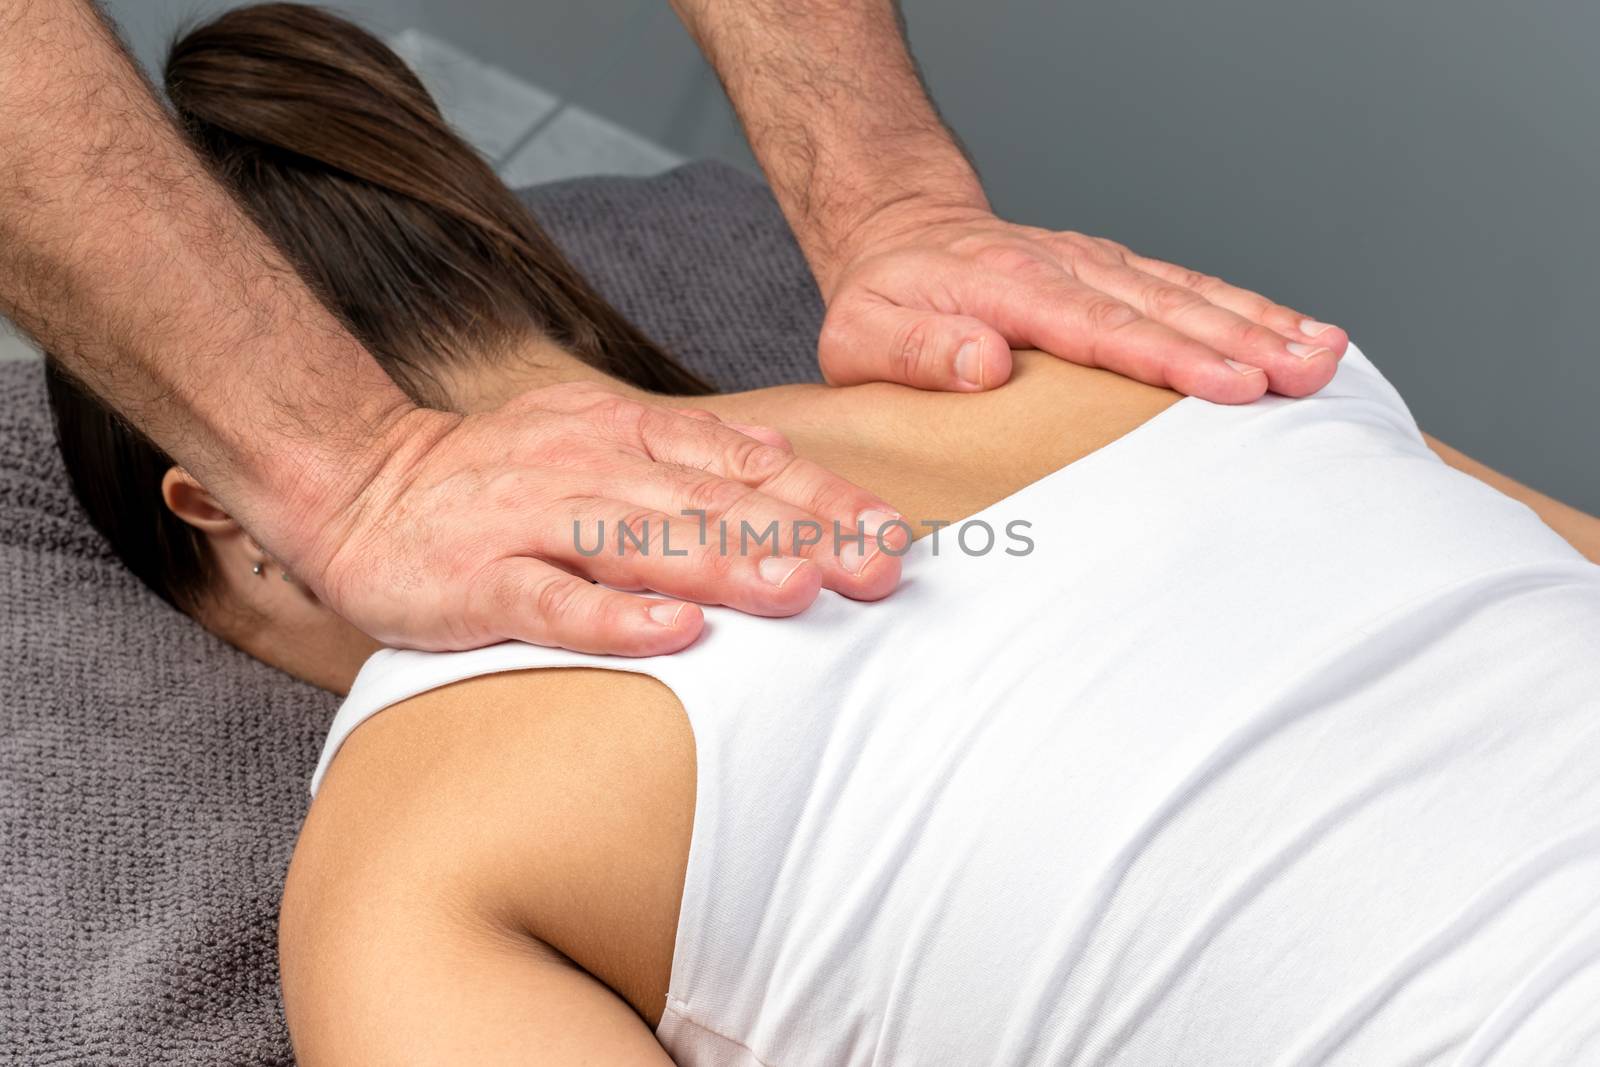 Close up detail of therapist applying pressure with hands on female shoulder.